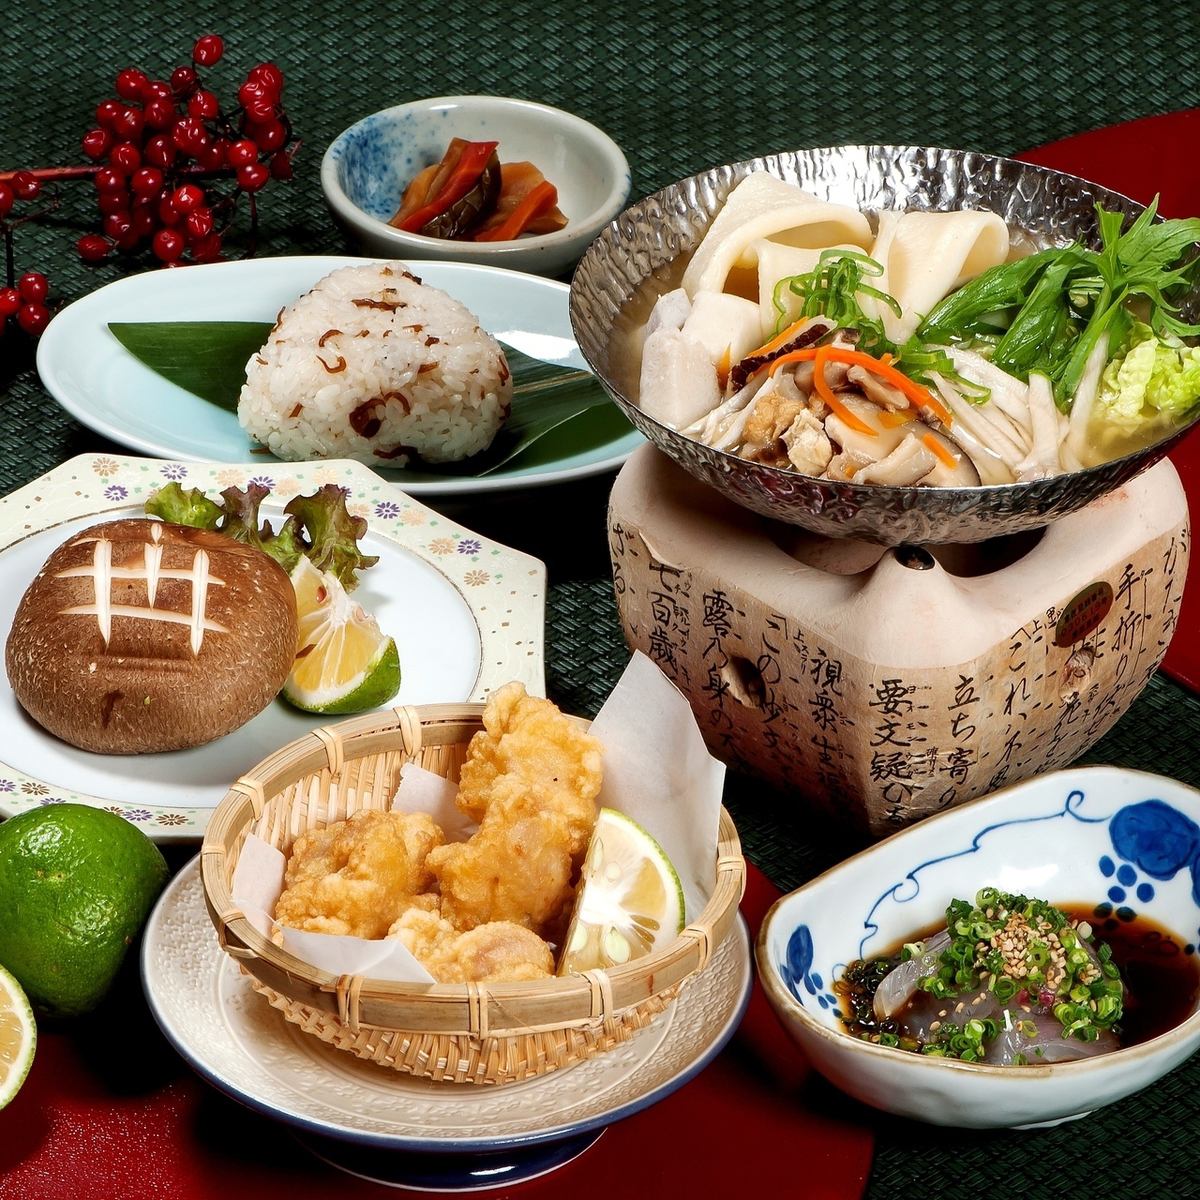 Enjoy a variety of Bungo local dishes such as toriten, thin horse, and dumpling soup in a private room